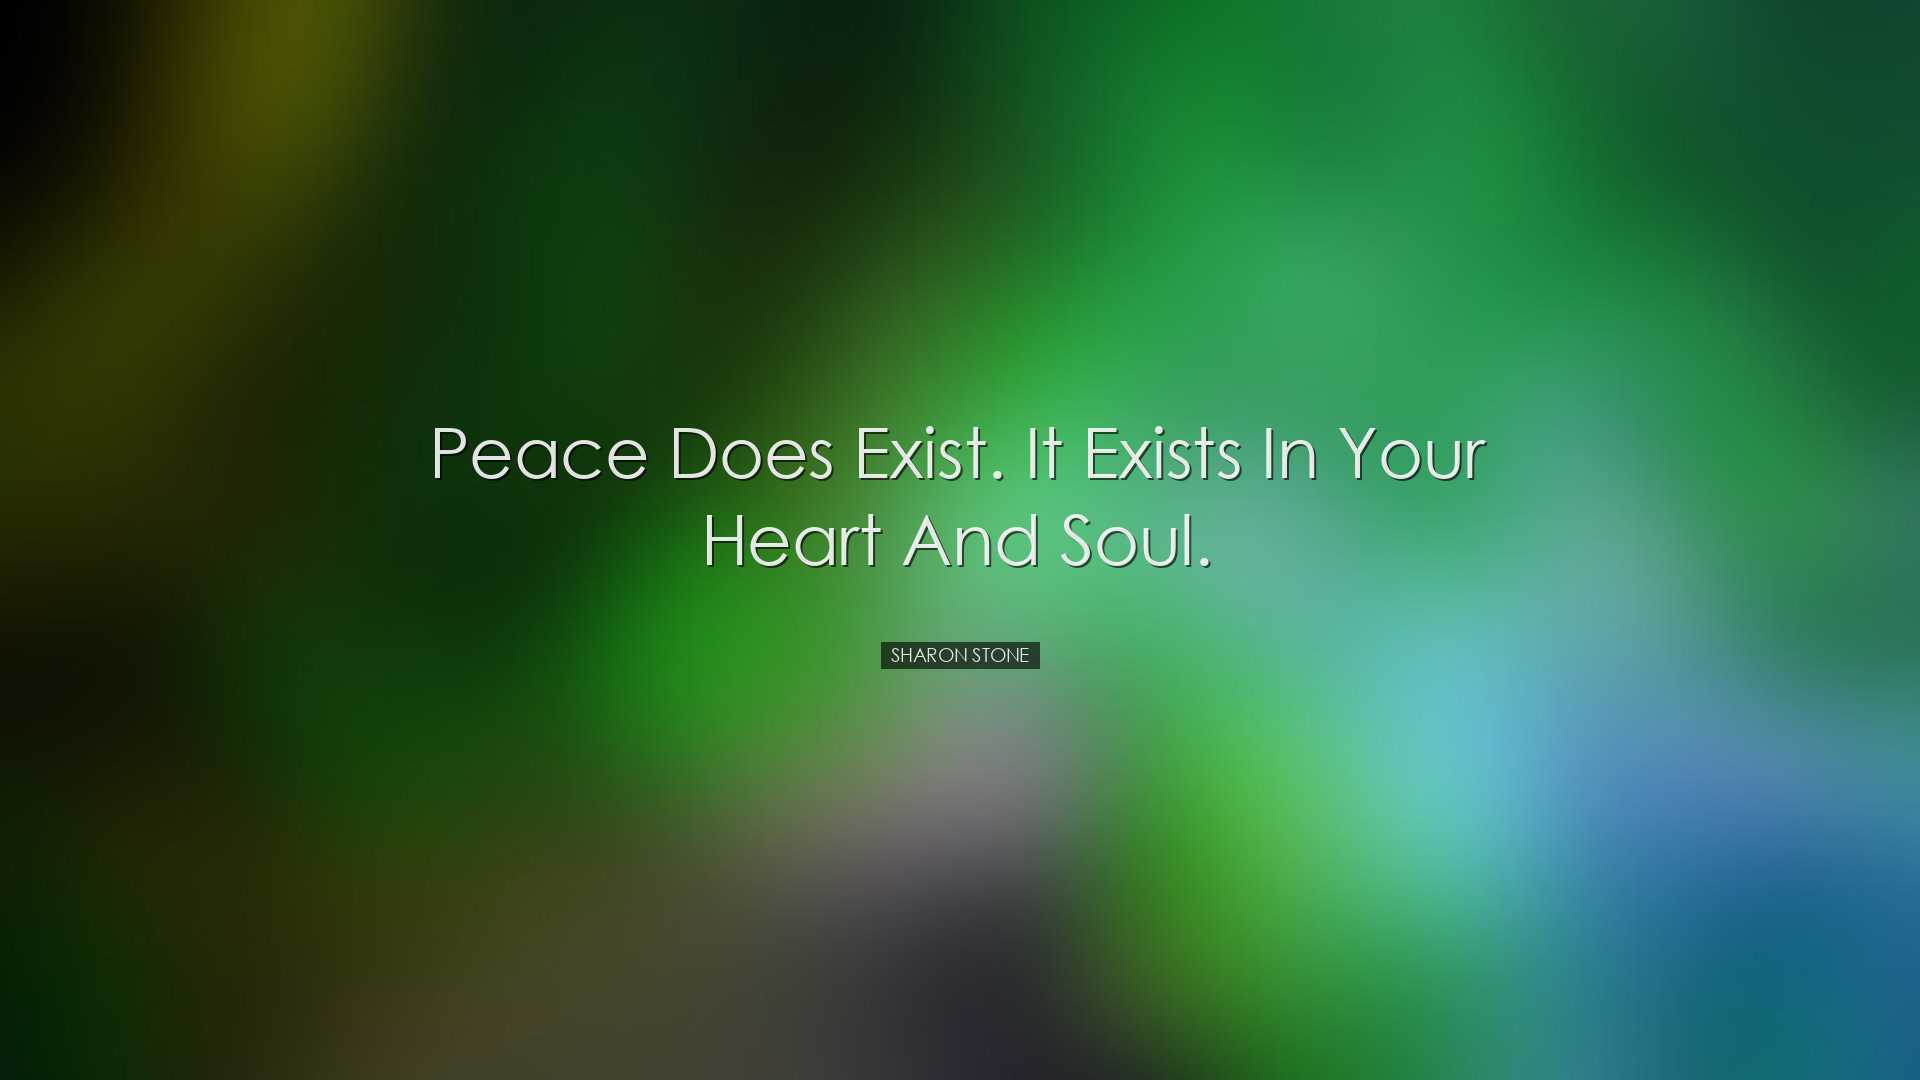 Peace does exist. It exists in your heart and soul. - Sharon Stone